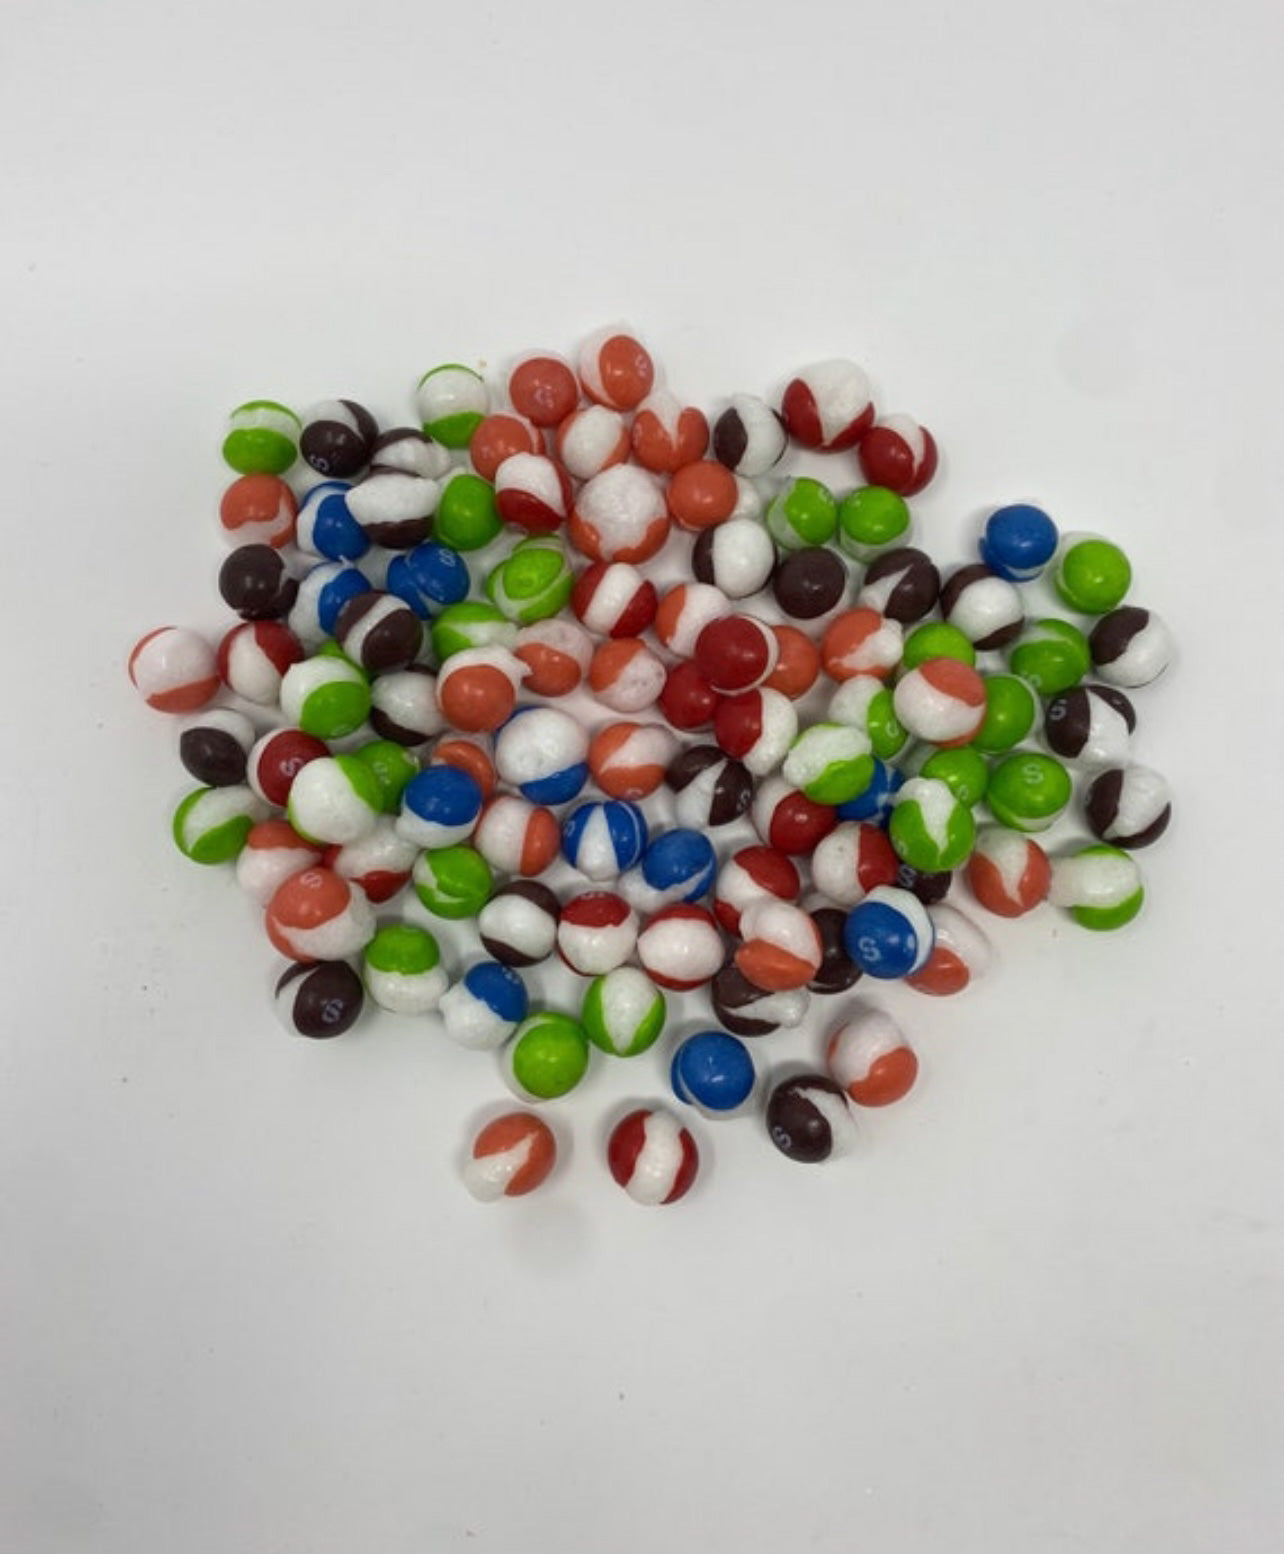 Freeze dried berry skittles